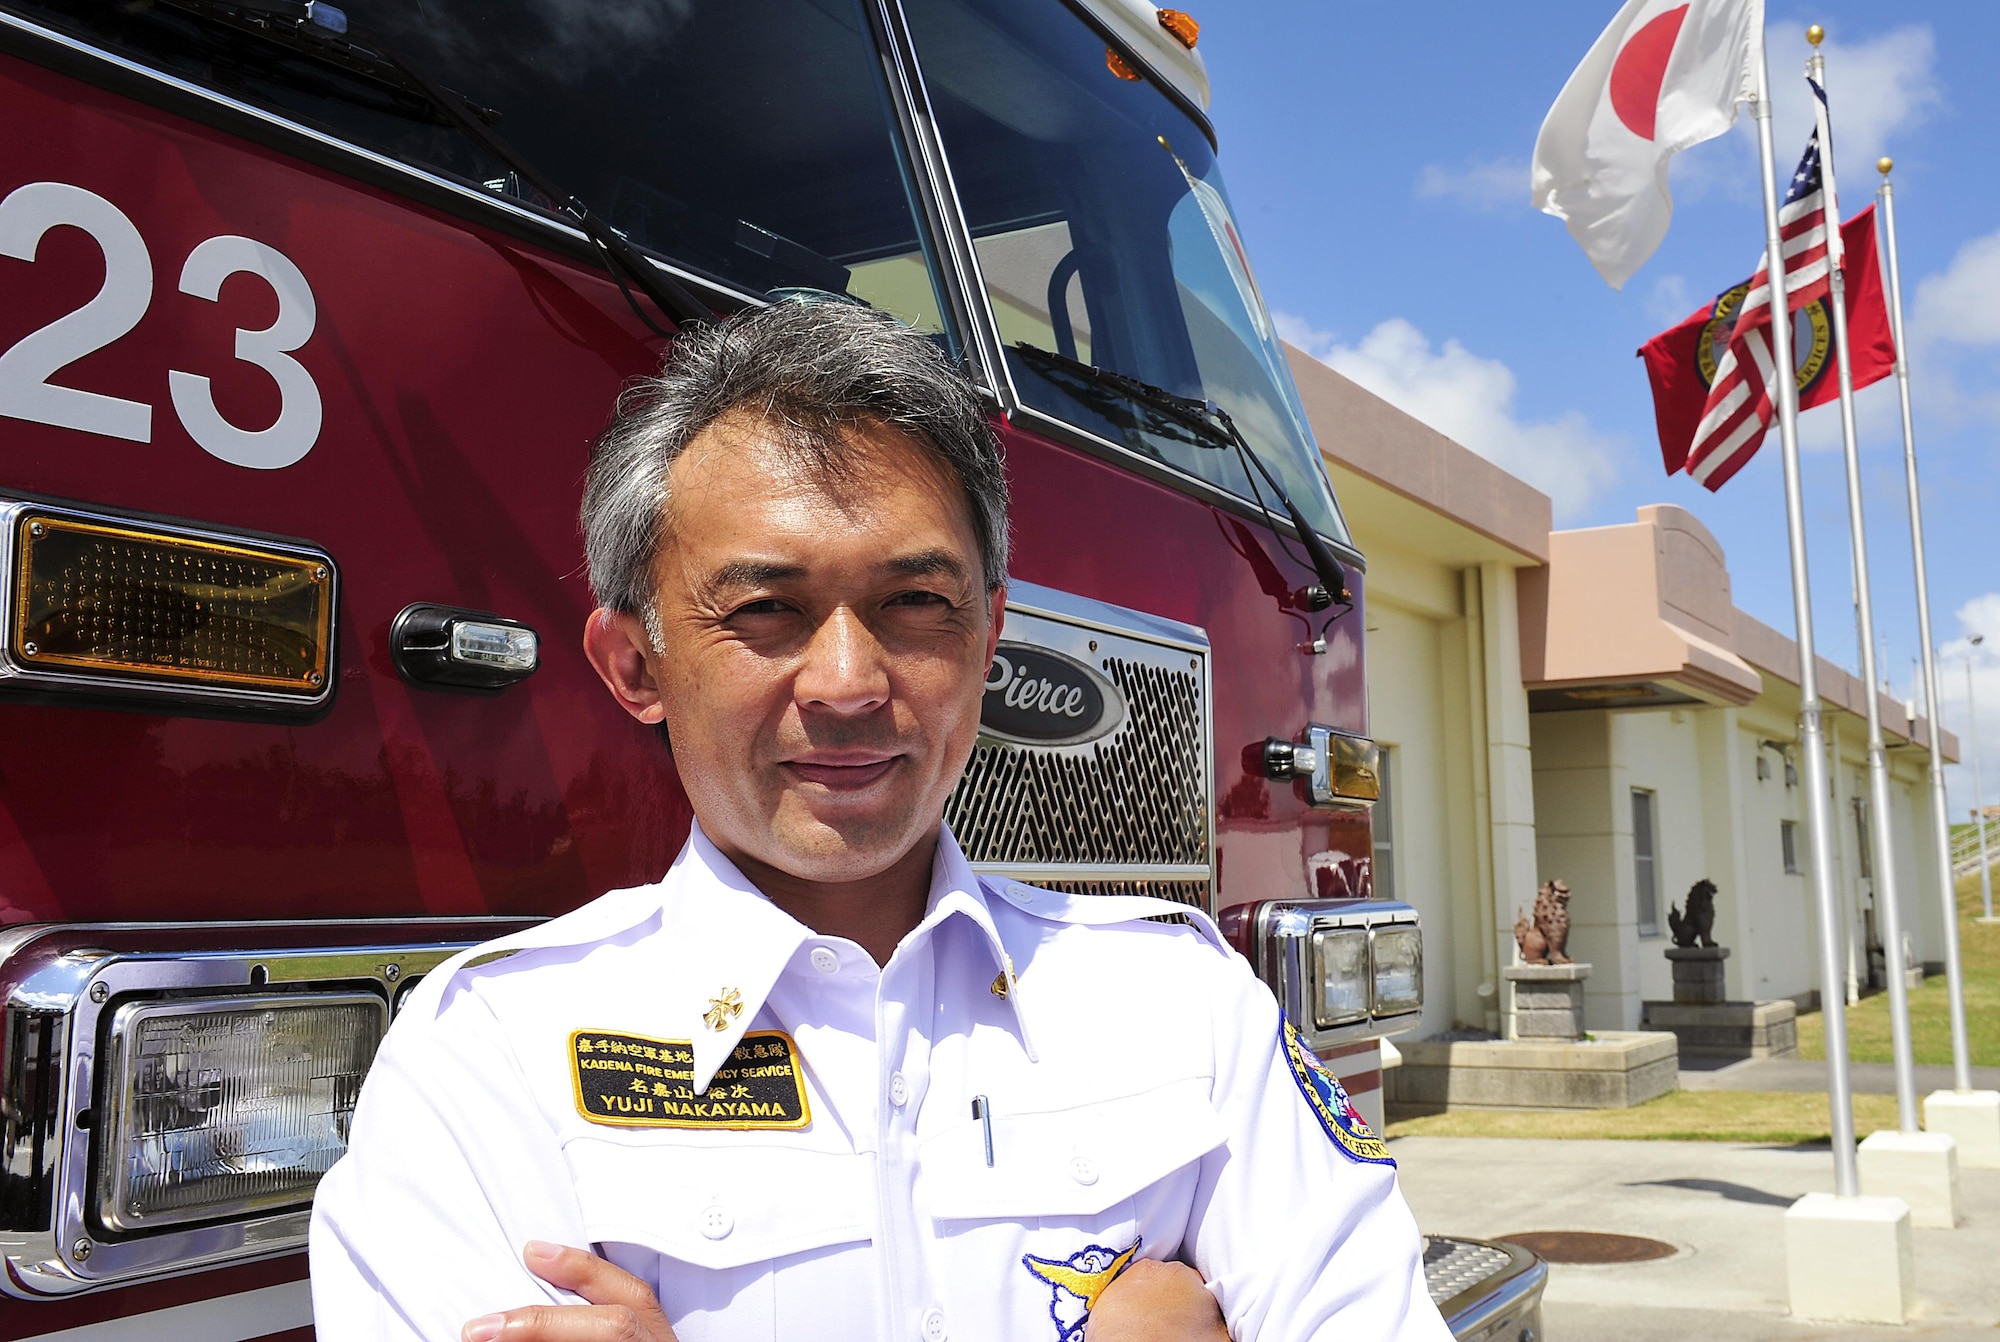 Yuji Nakayama, the 18th Civil Engineer Squadron district chief, poses for a photo in front of a fire truck on Kadena Air Base, Japan, April 2, 2015. Nakamura, who has been working at the fire department for more than 22 years, recently won the 2014 Air Force Fire Officer of the Year award, civilian category, for his hard work and dedication. (U.S. Air Force photo/Naoto Anazawa)